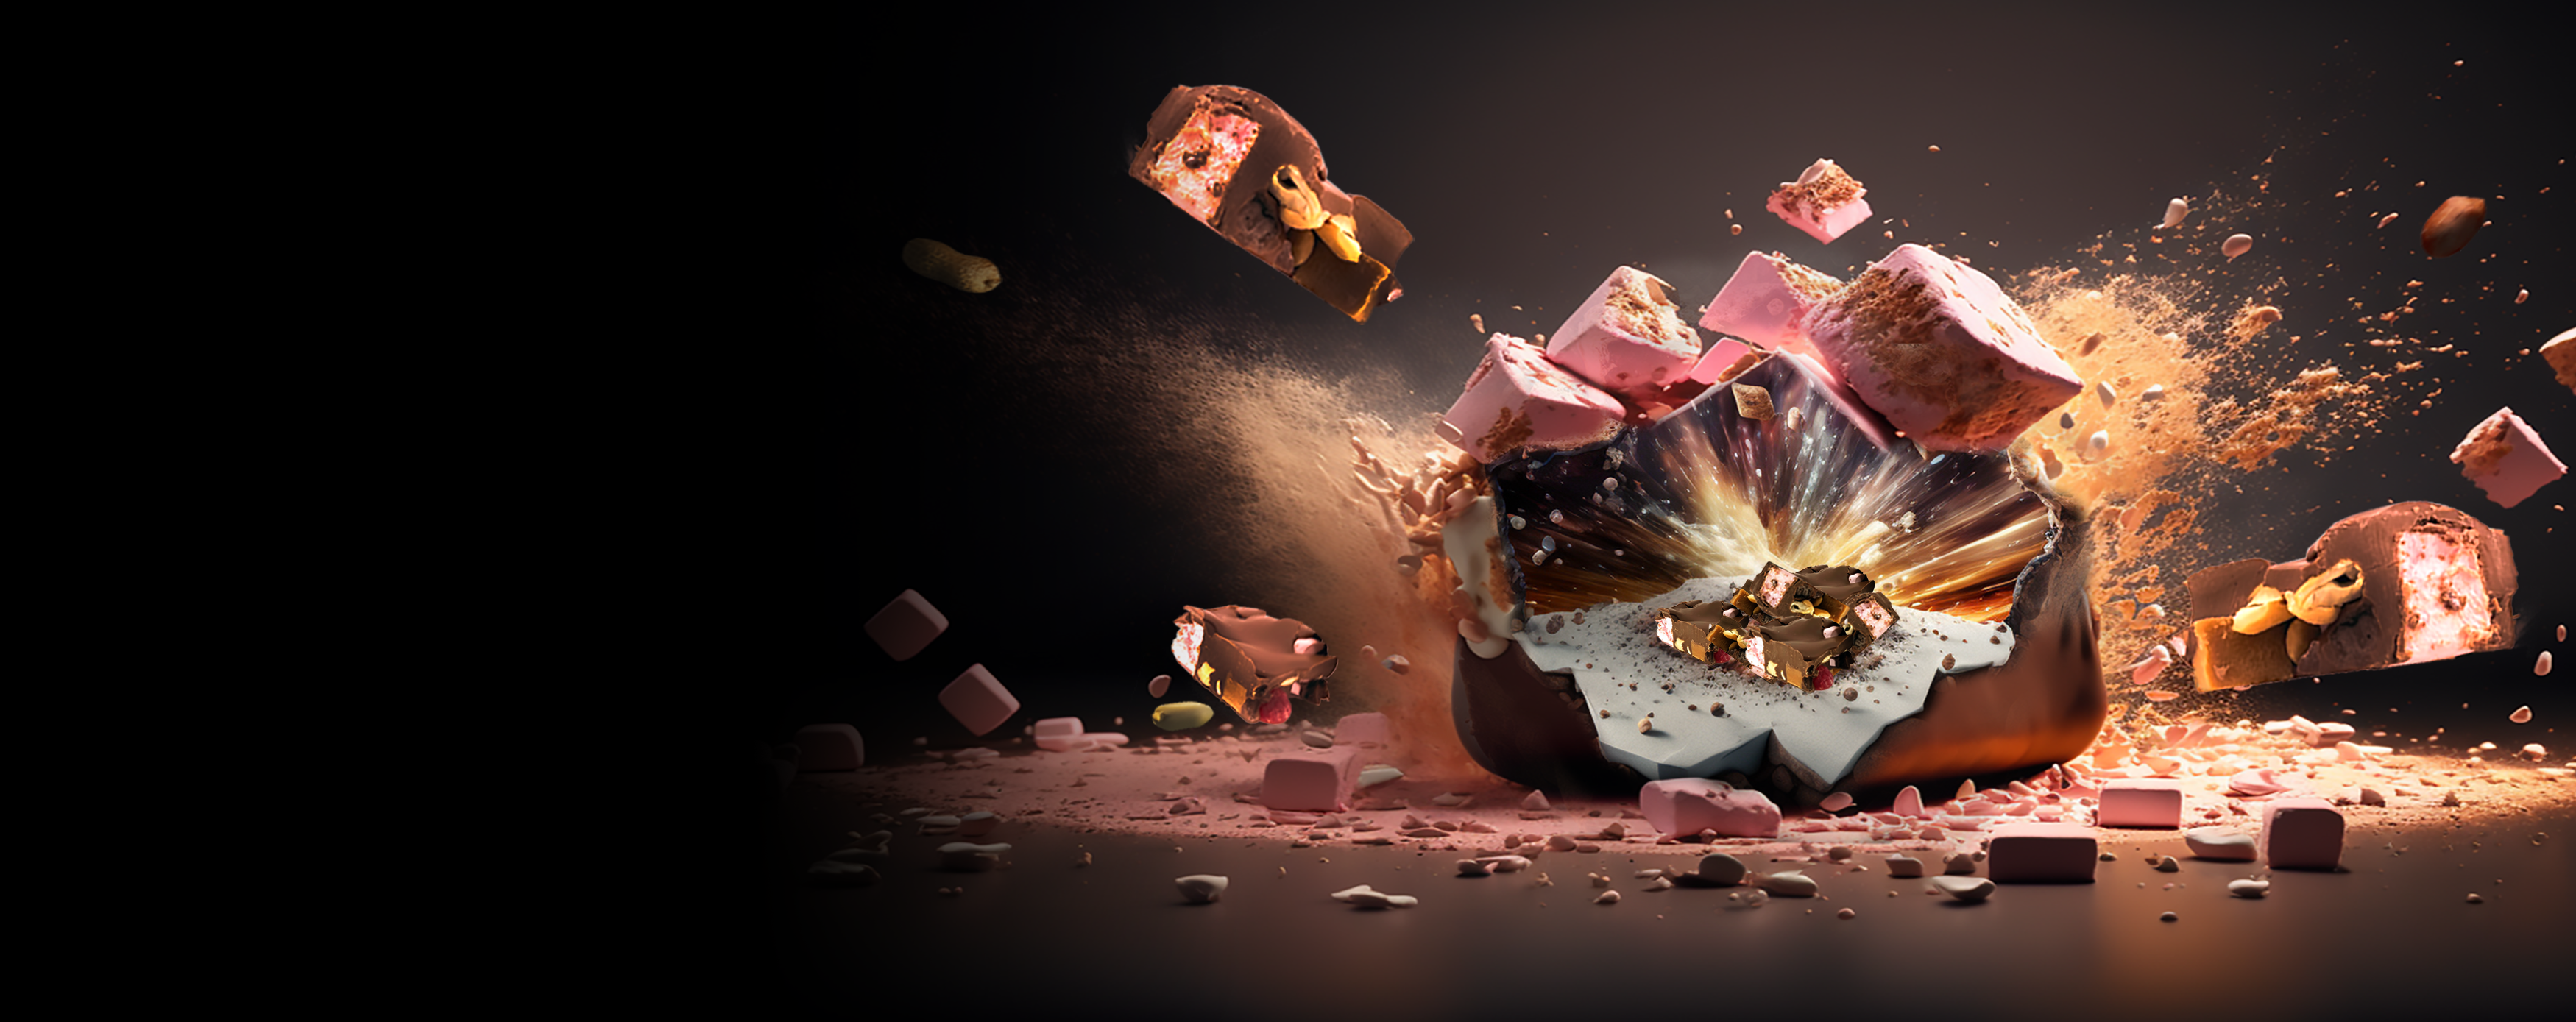 Image of rocky road exploding on the screen with peanuts, marshmallows and jellies flying out